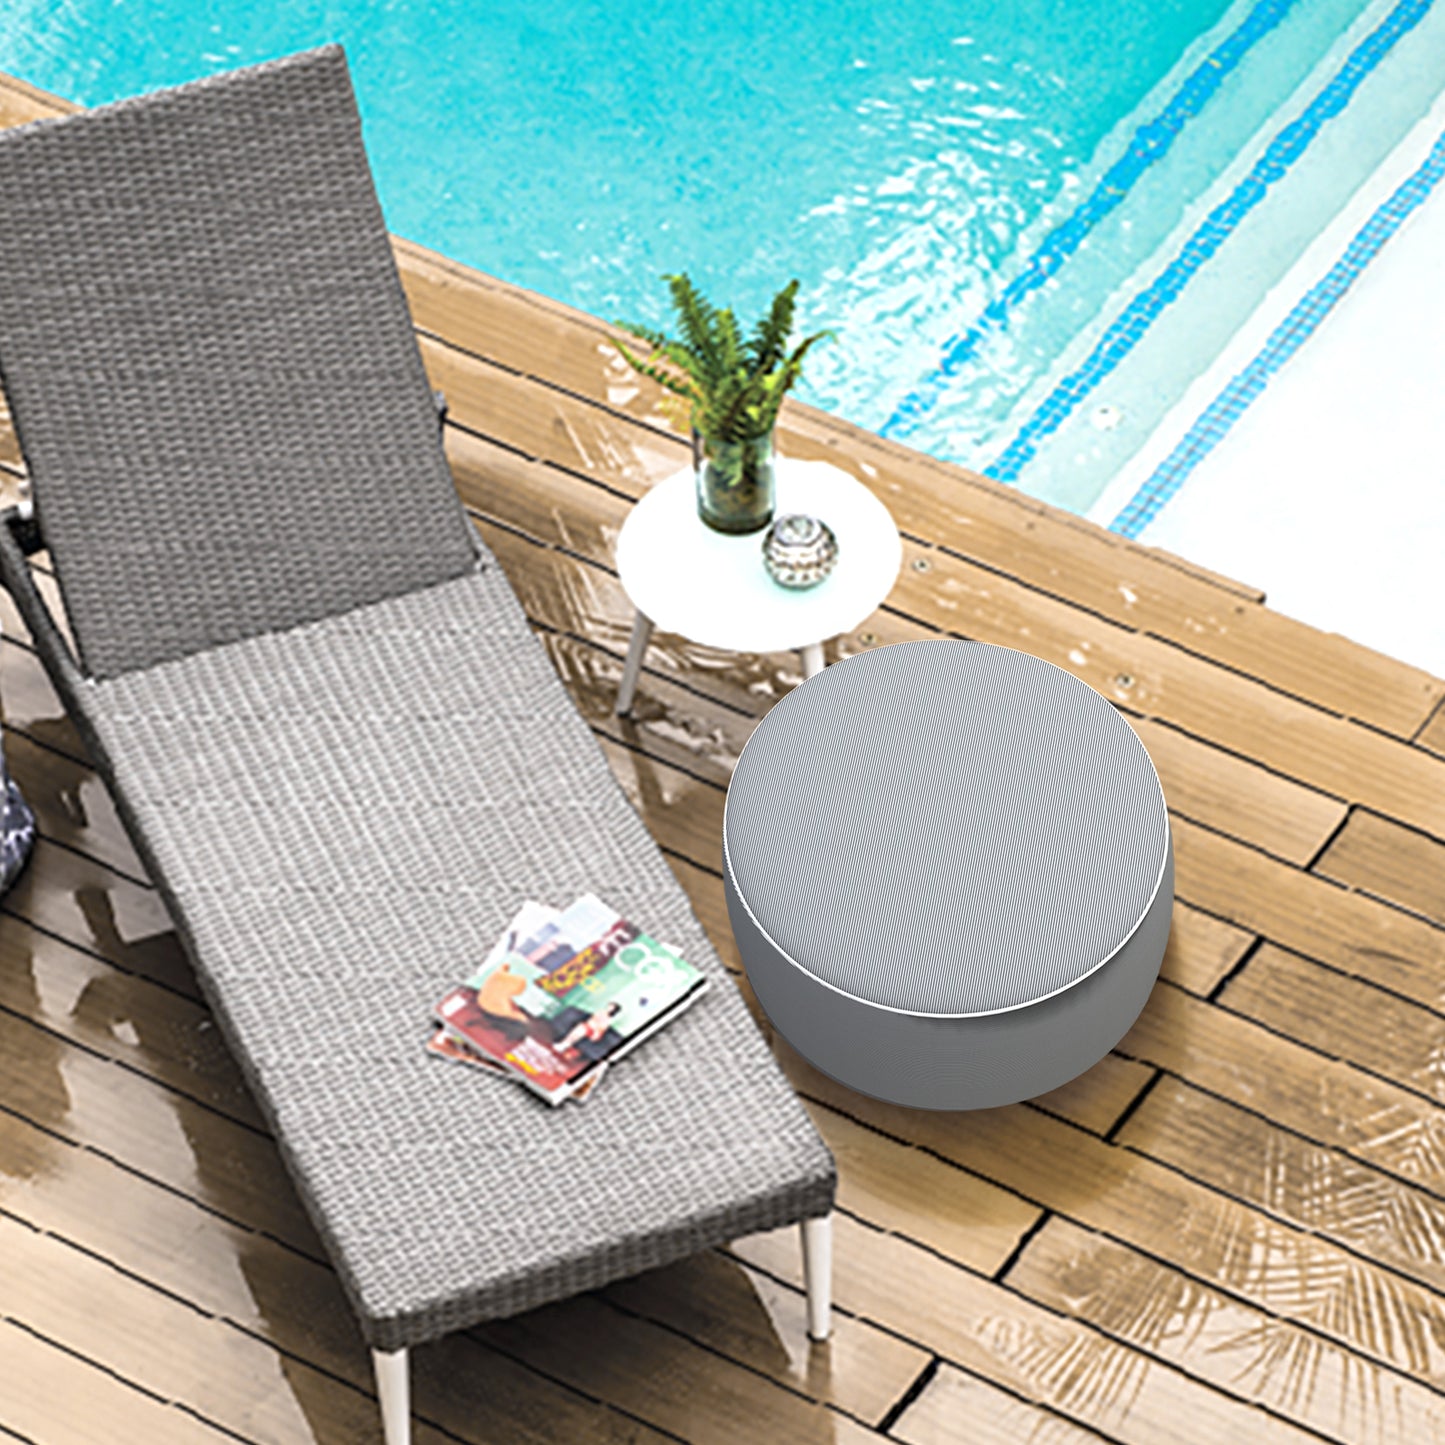 Melody Elephant Patio Inflatable Ottoman, 21x9 Inch Portable Stool Ottoman with Handle, Outdoor Round Footrest Stool for Garden Camping, Stripe Gray